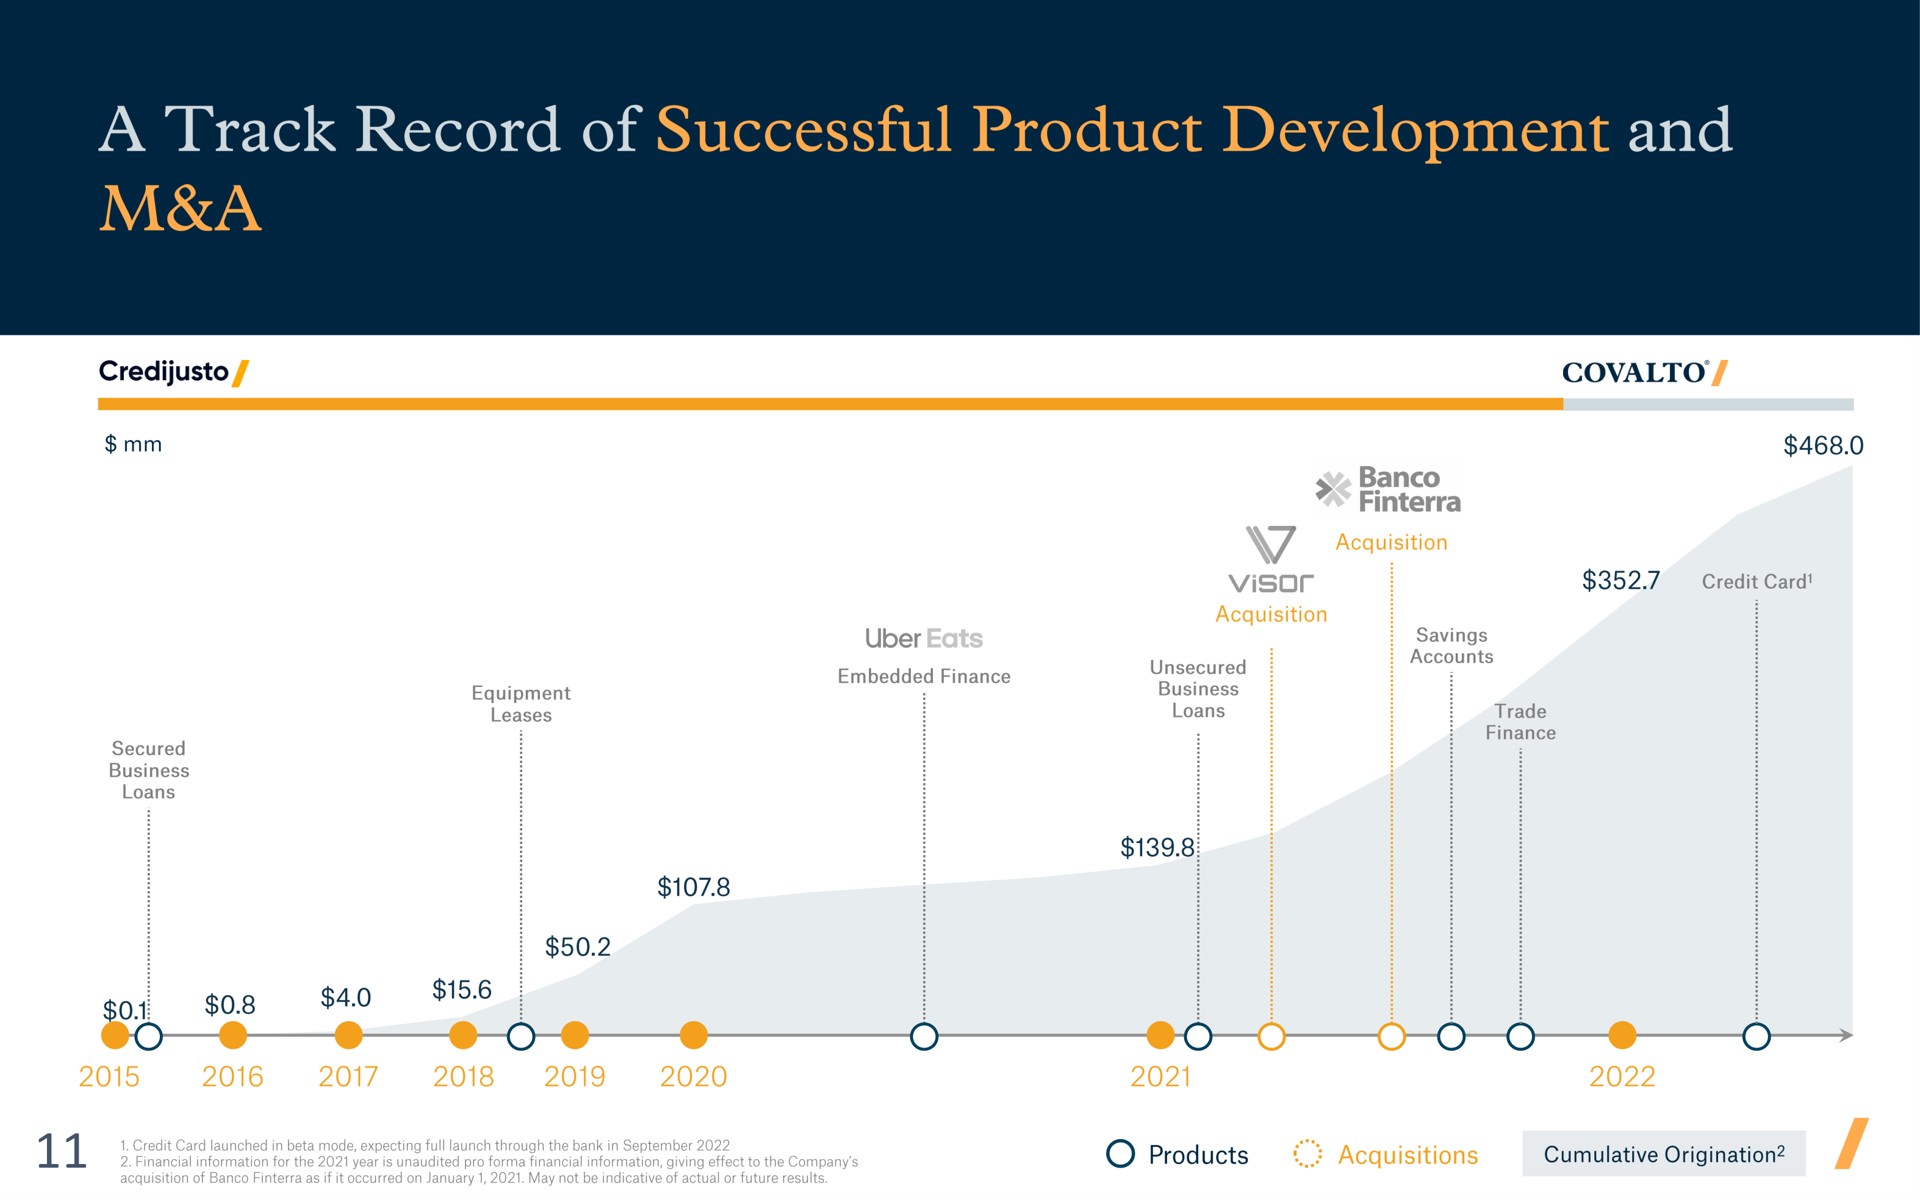 a track record of successful product development and a | Covalto